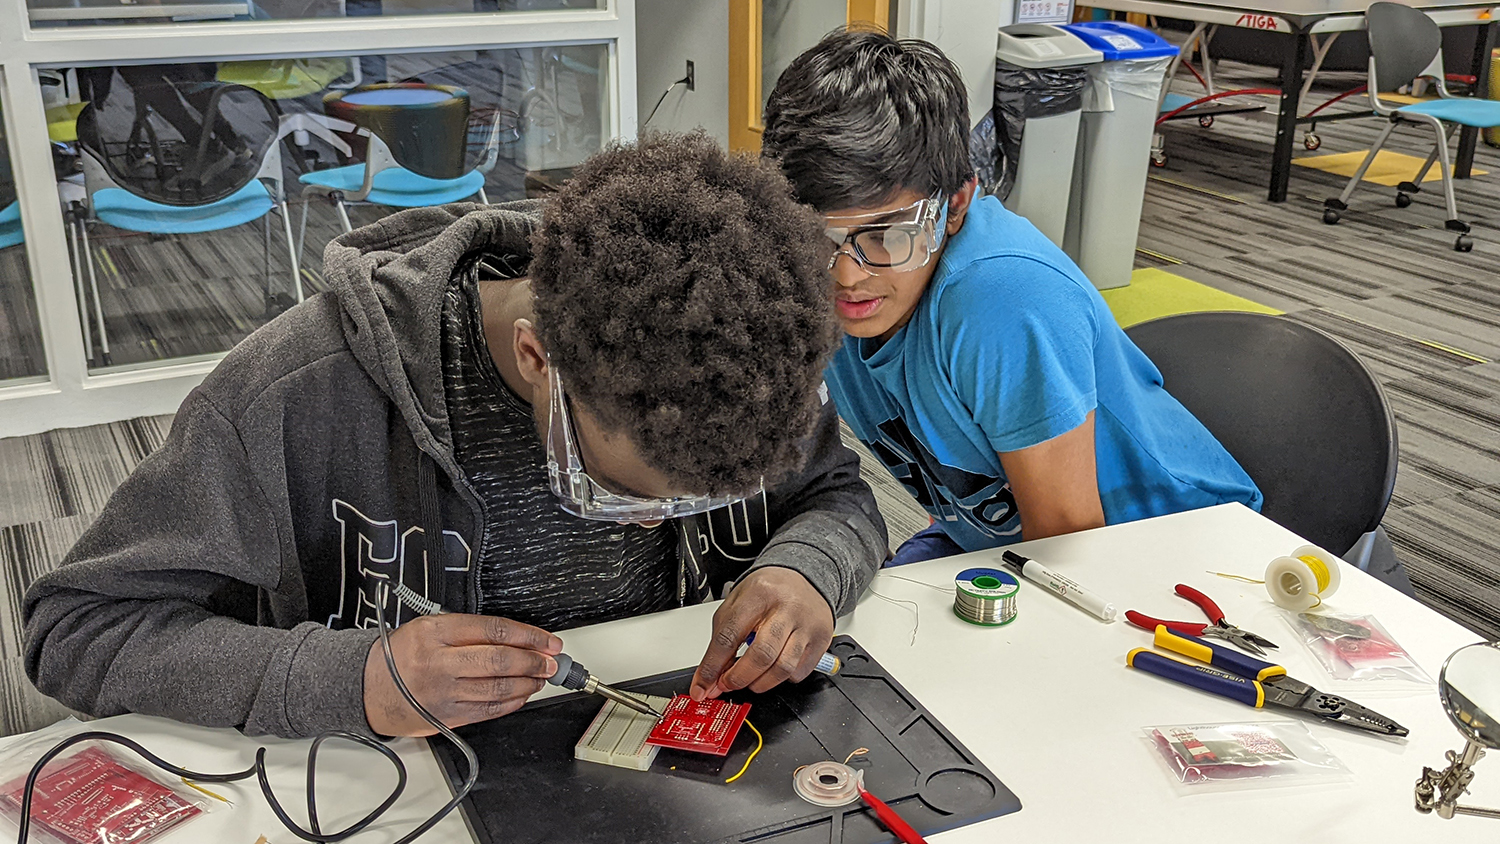 Two students at lab work table soldering electronics.